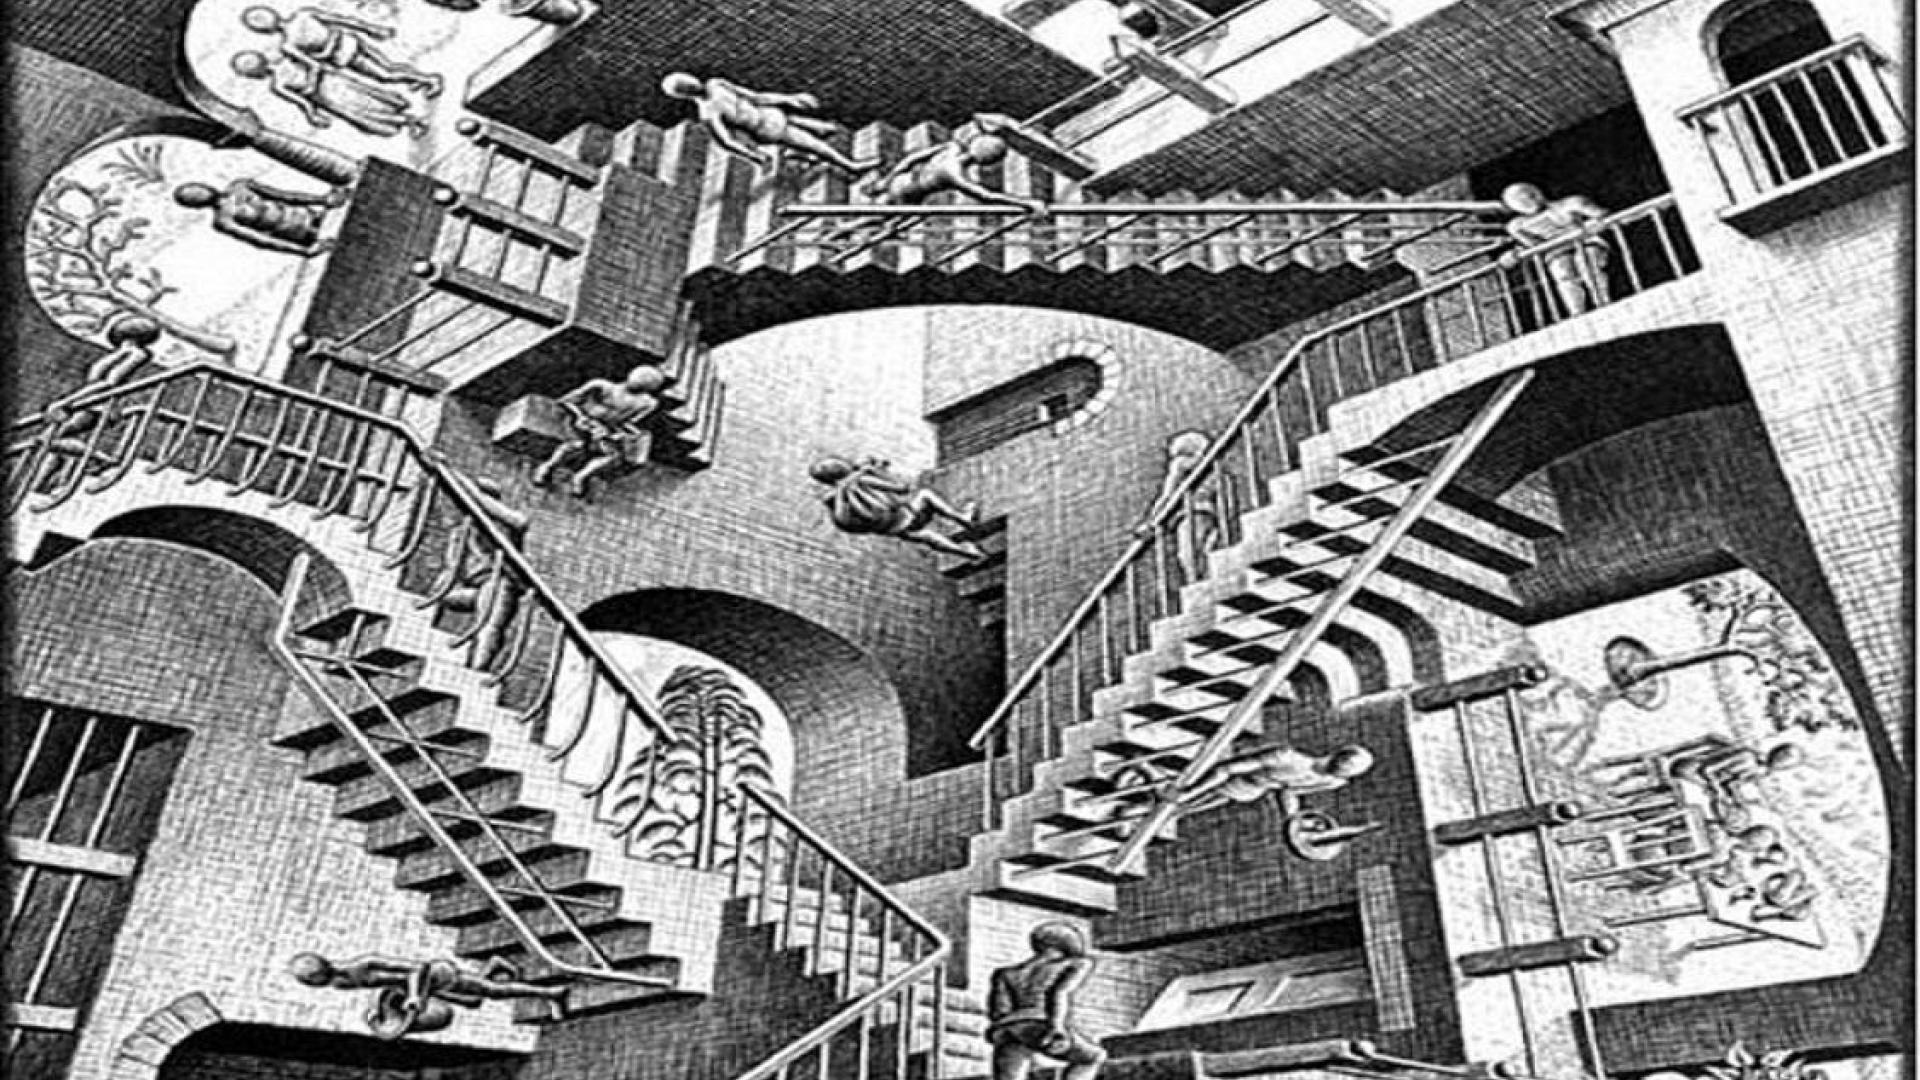 Image Result For Relativity By M C Escher Wallpapers